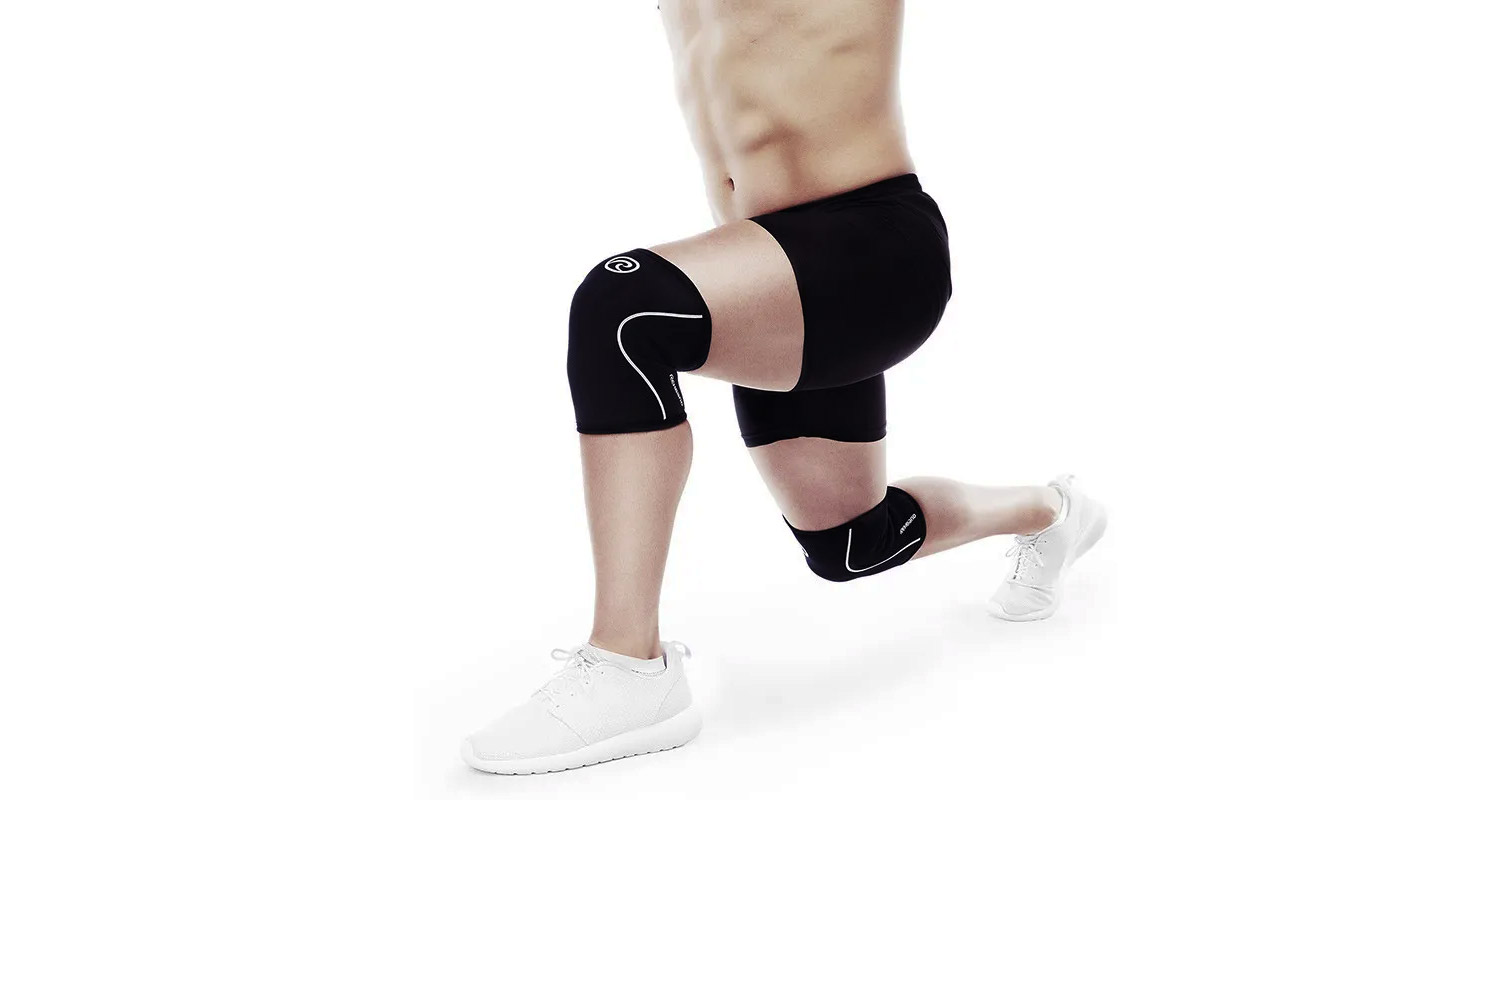 Knee brace for squats